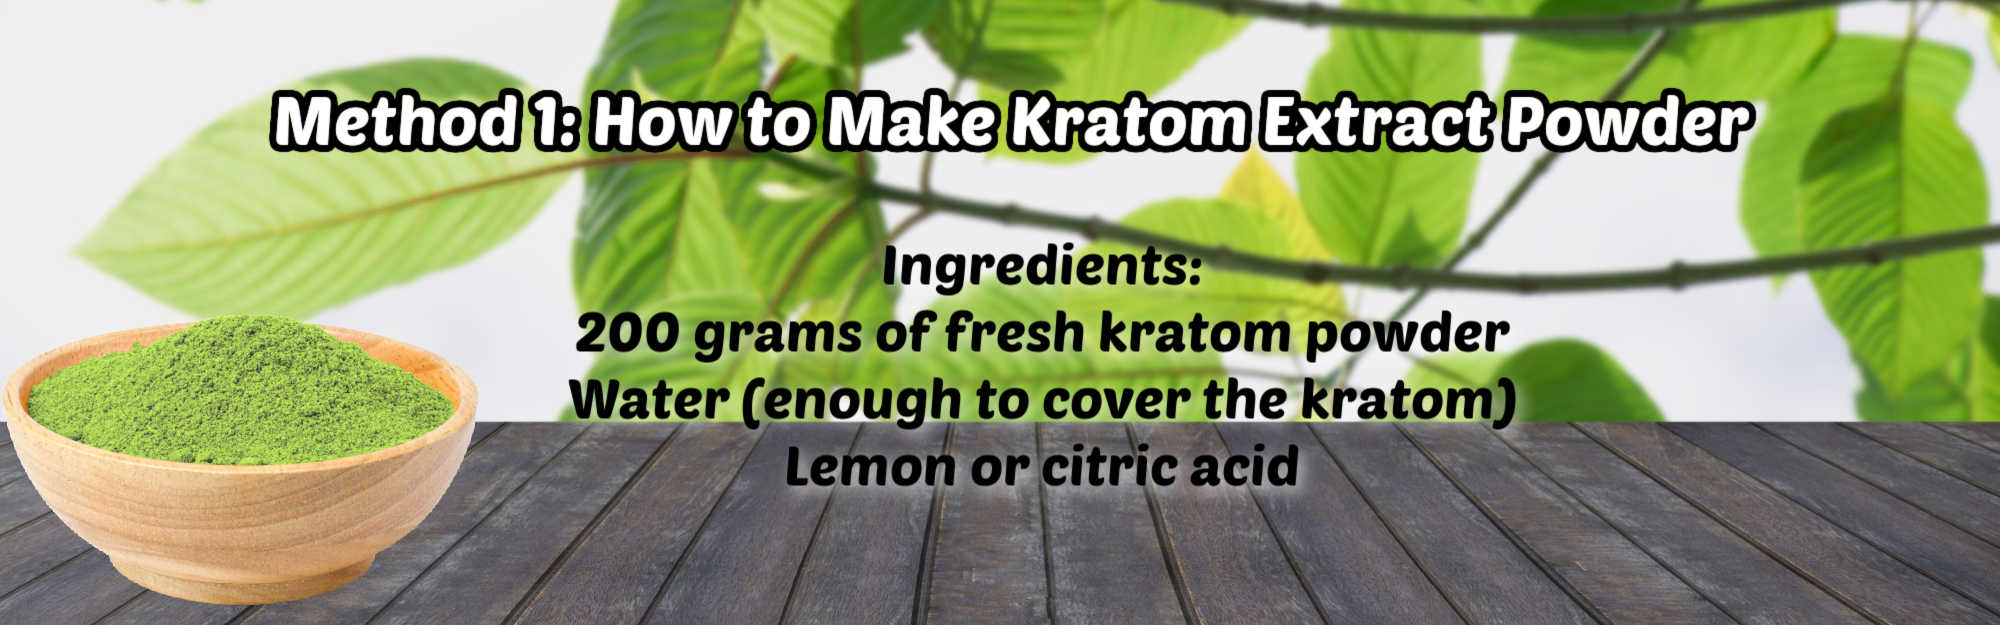 image of how to make kratom extract powder